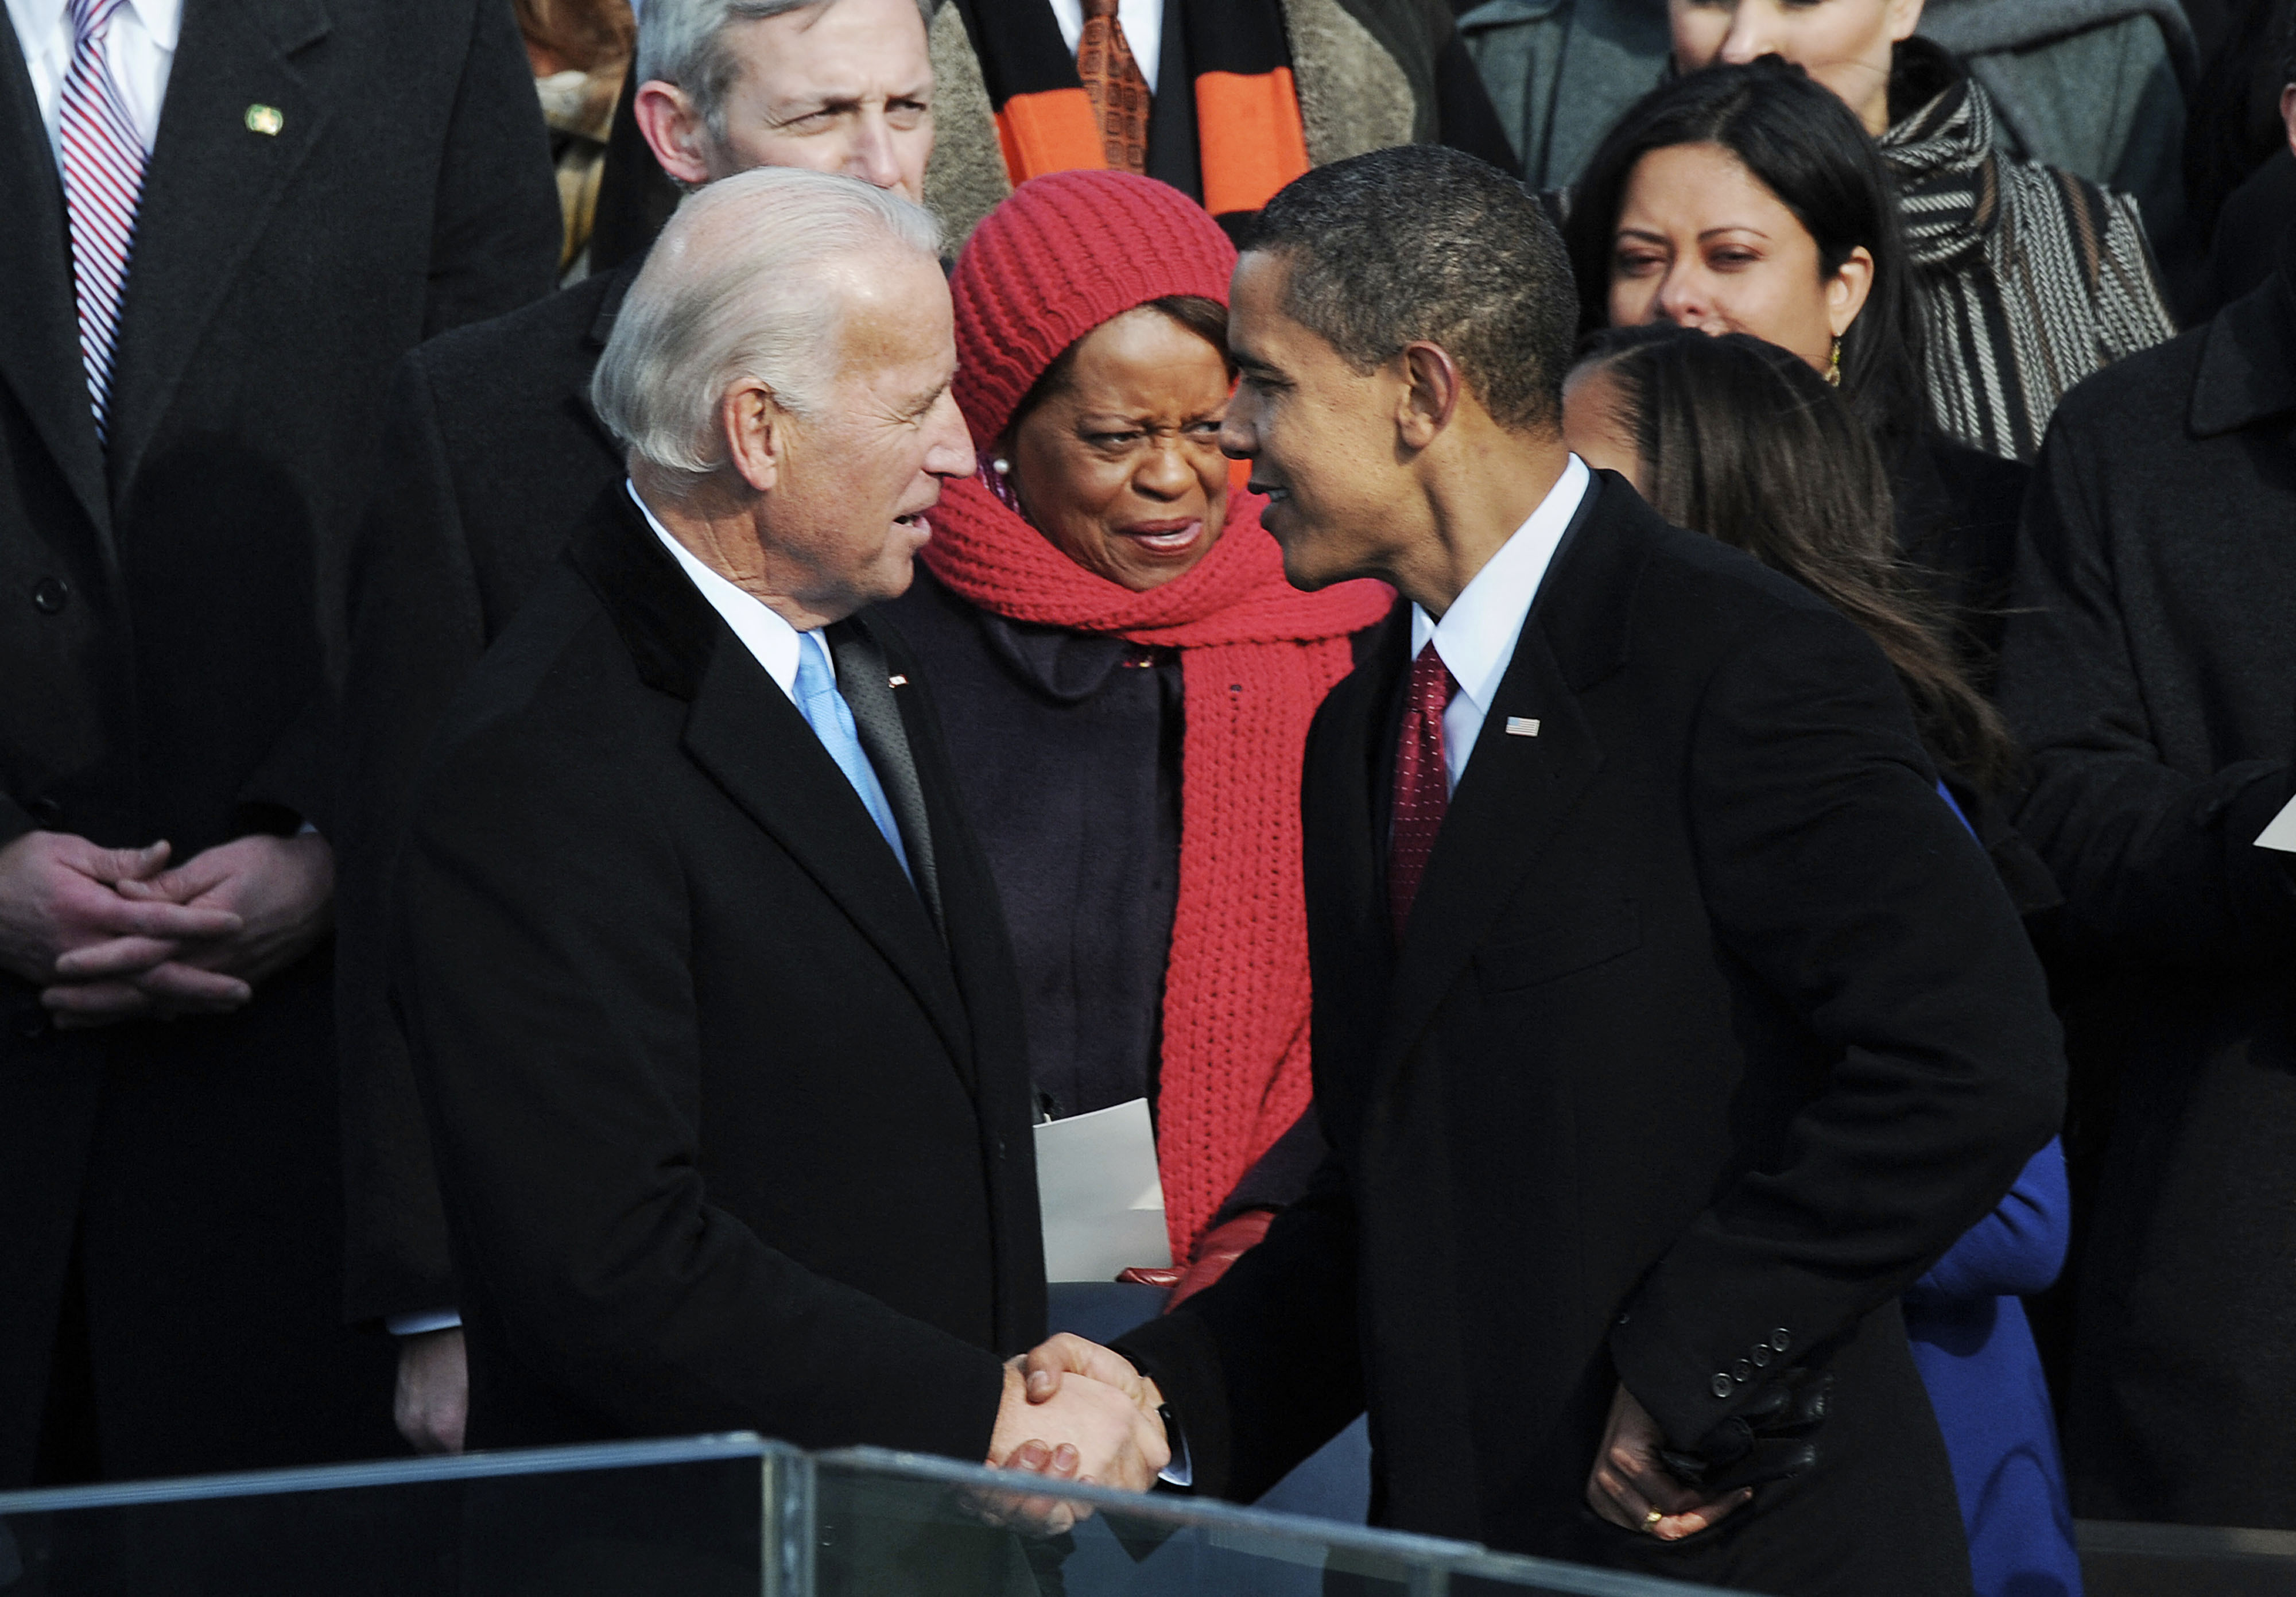 President Biden shaking hands with Previous President Obama